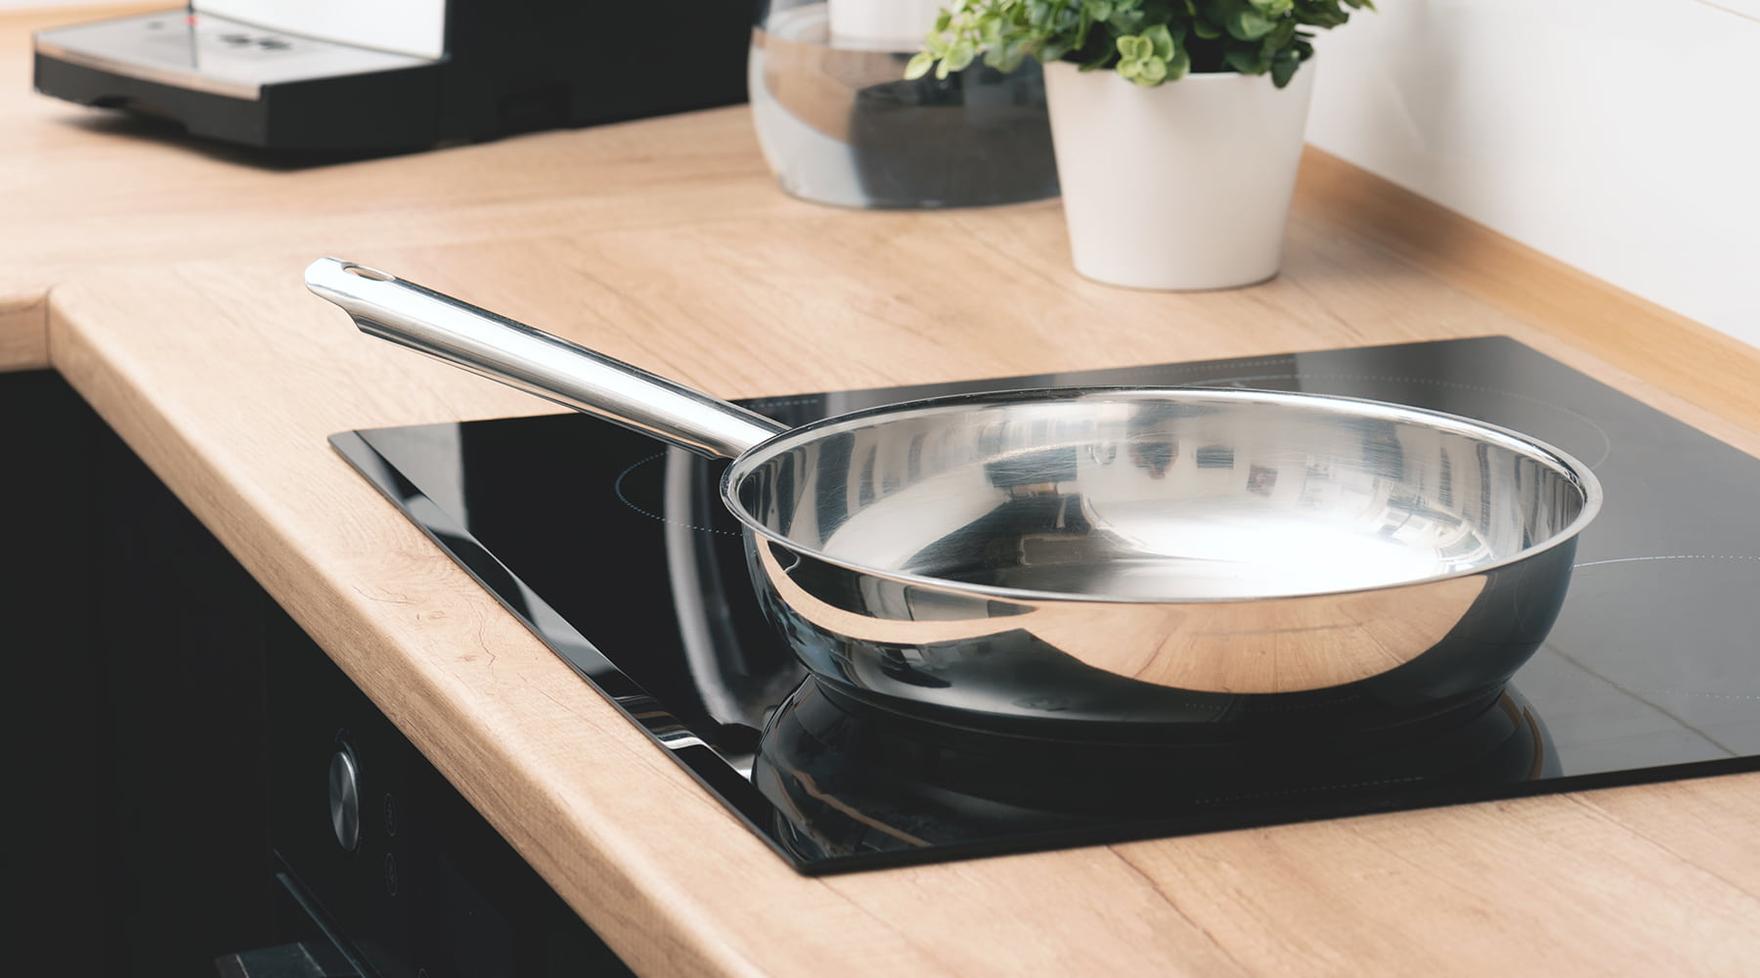 Metal pan on an induction range in a kitchen